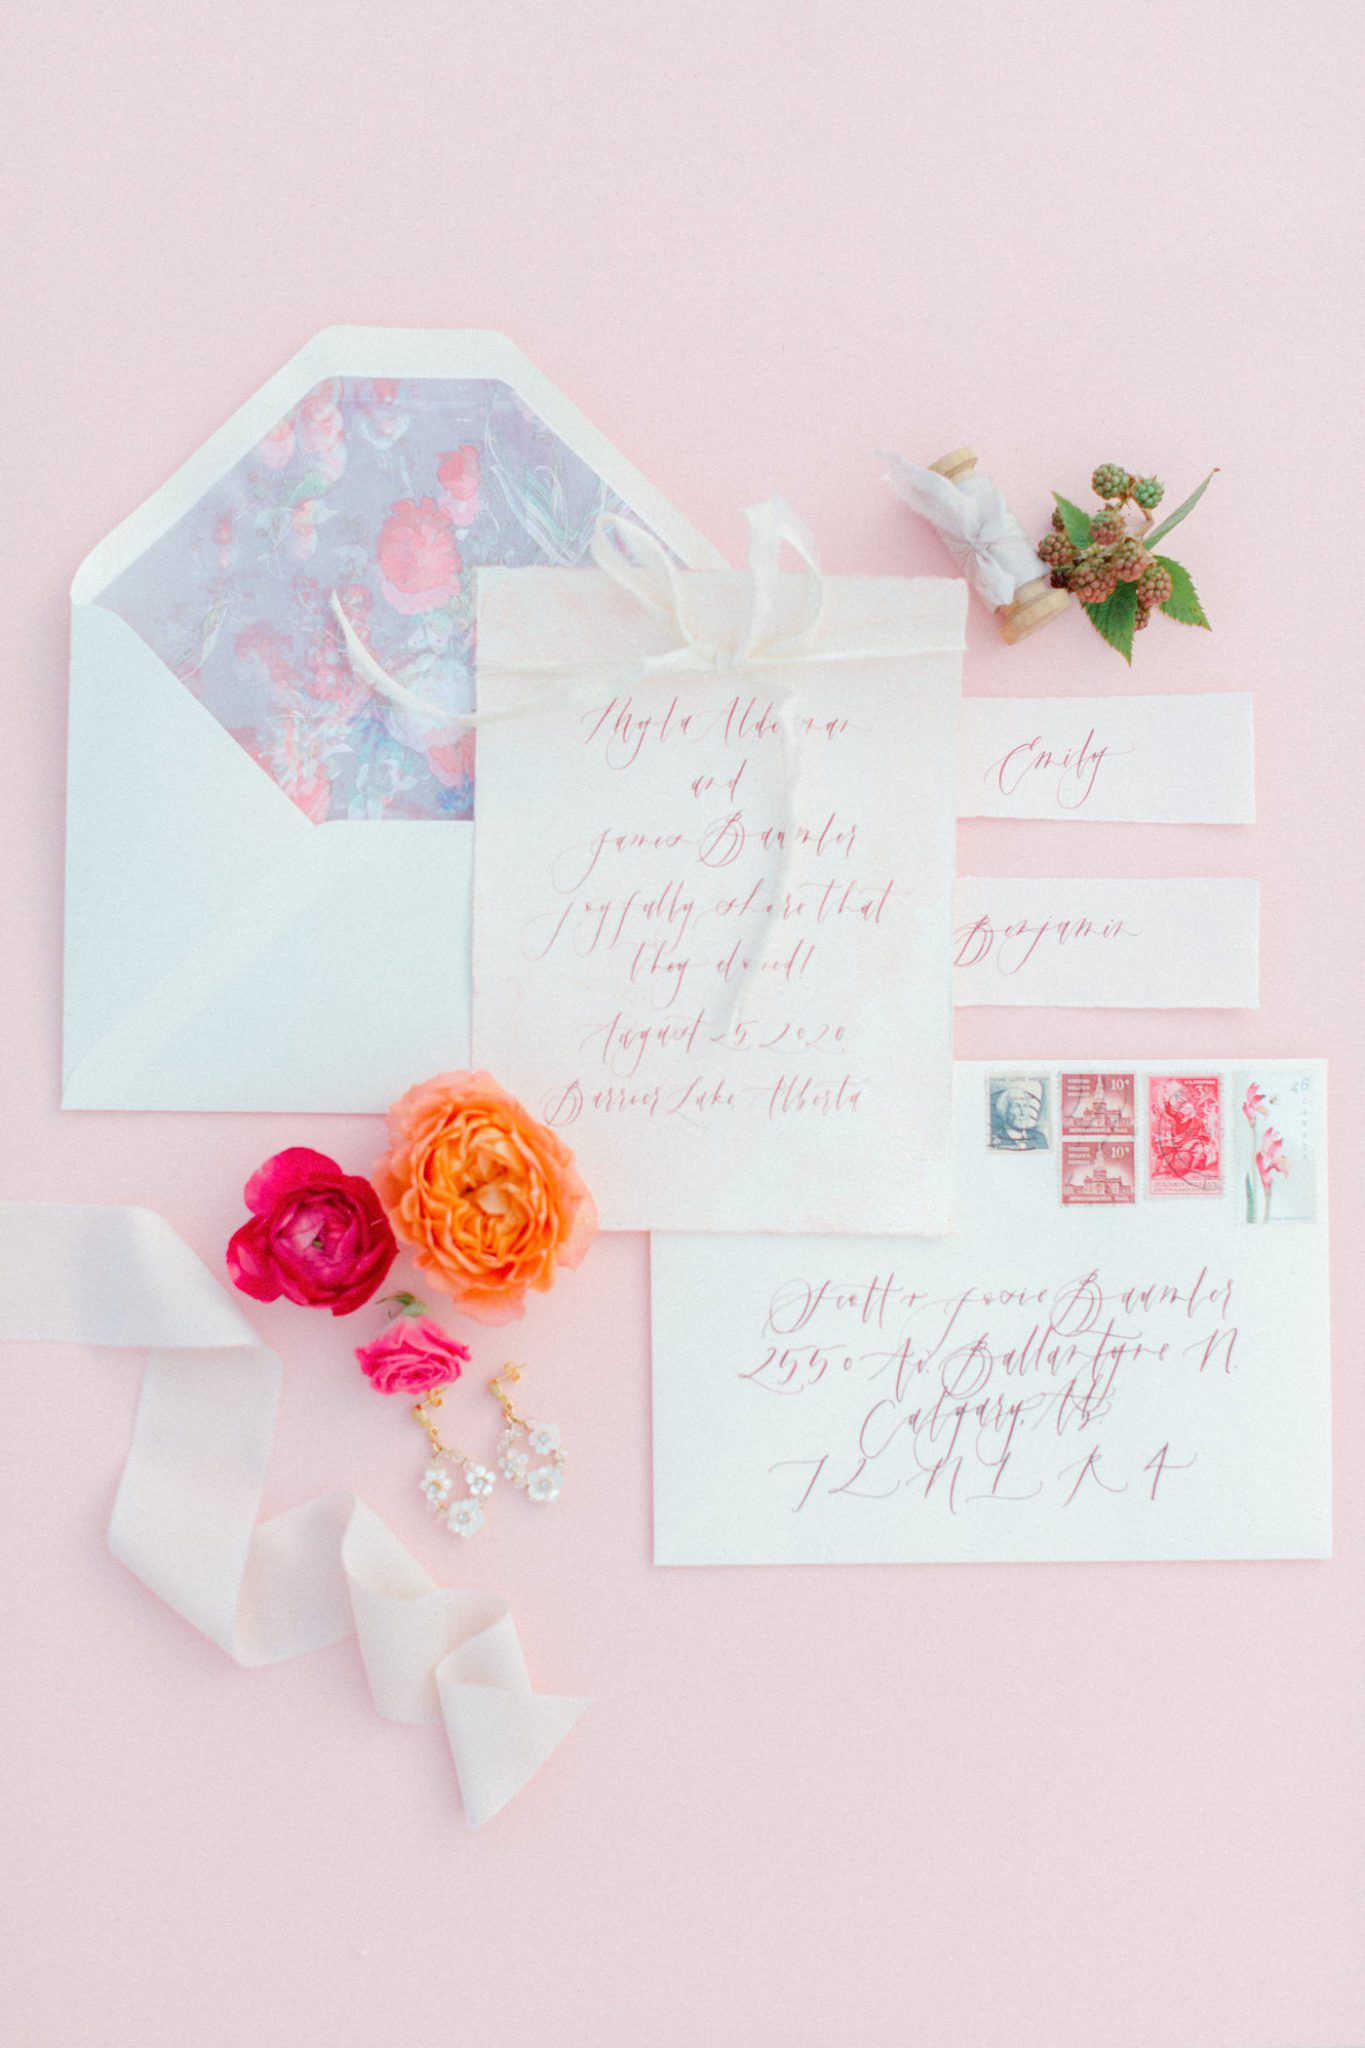 Romantic pink and white wedding stationery inspiration for a mountainside wedding